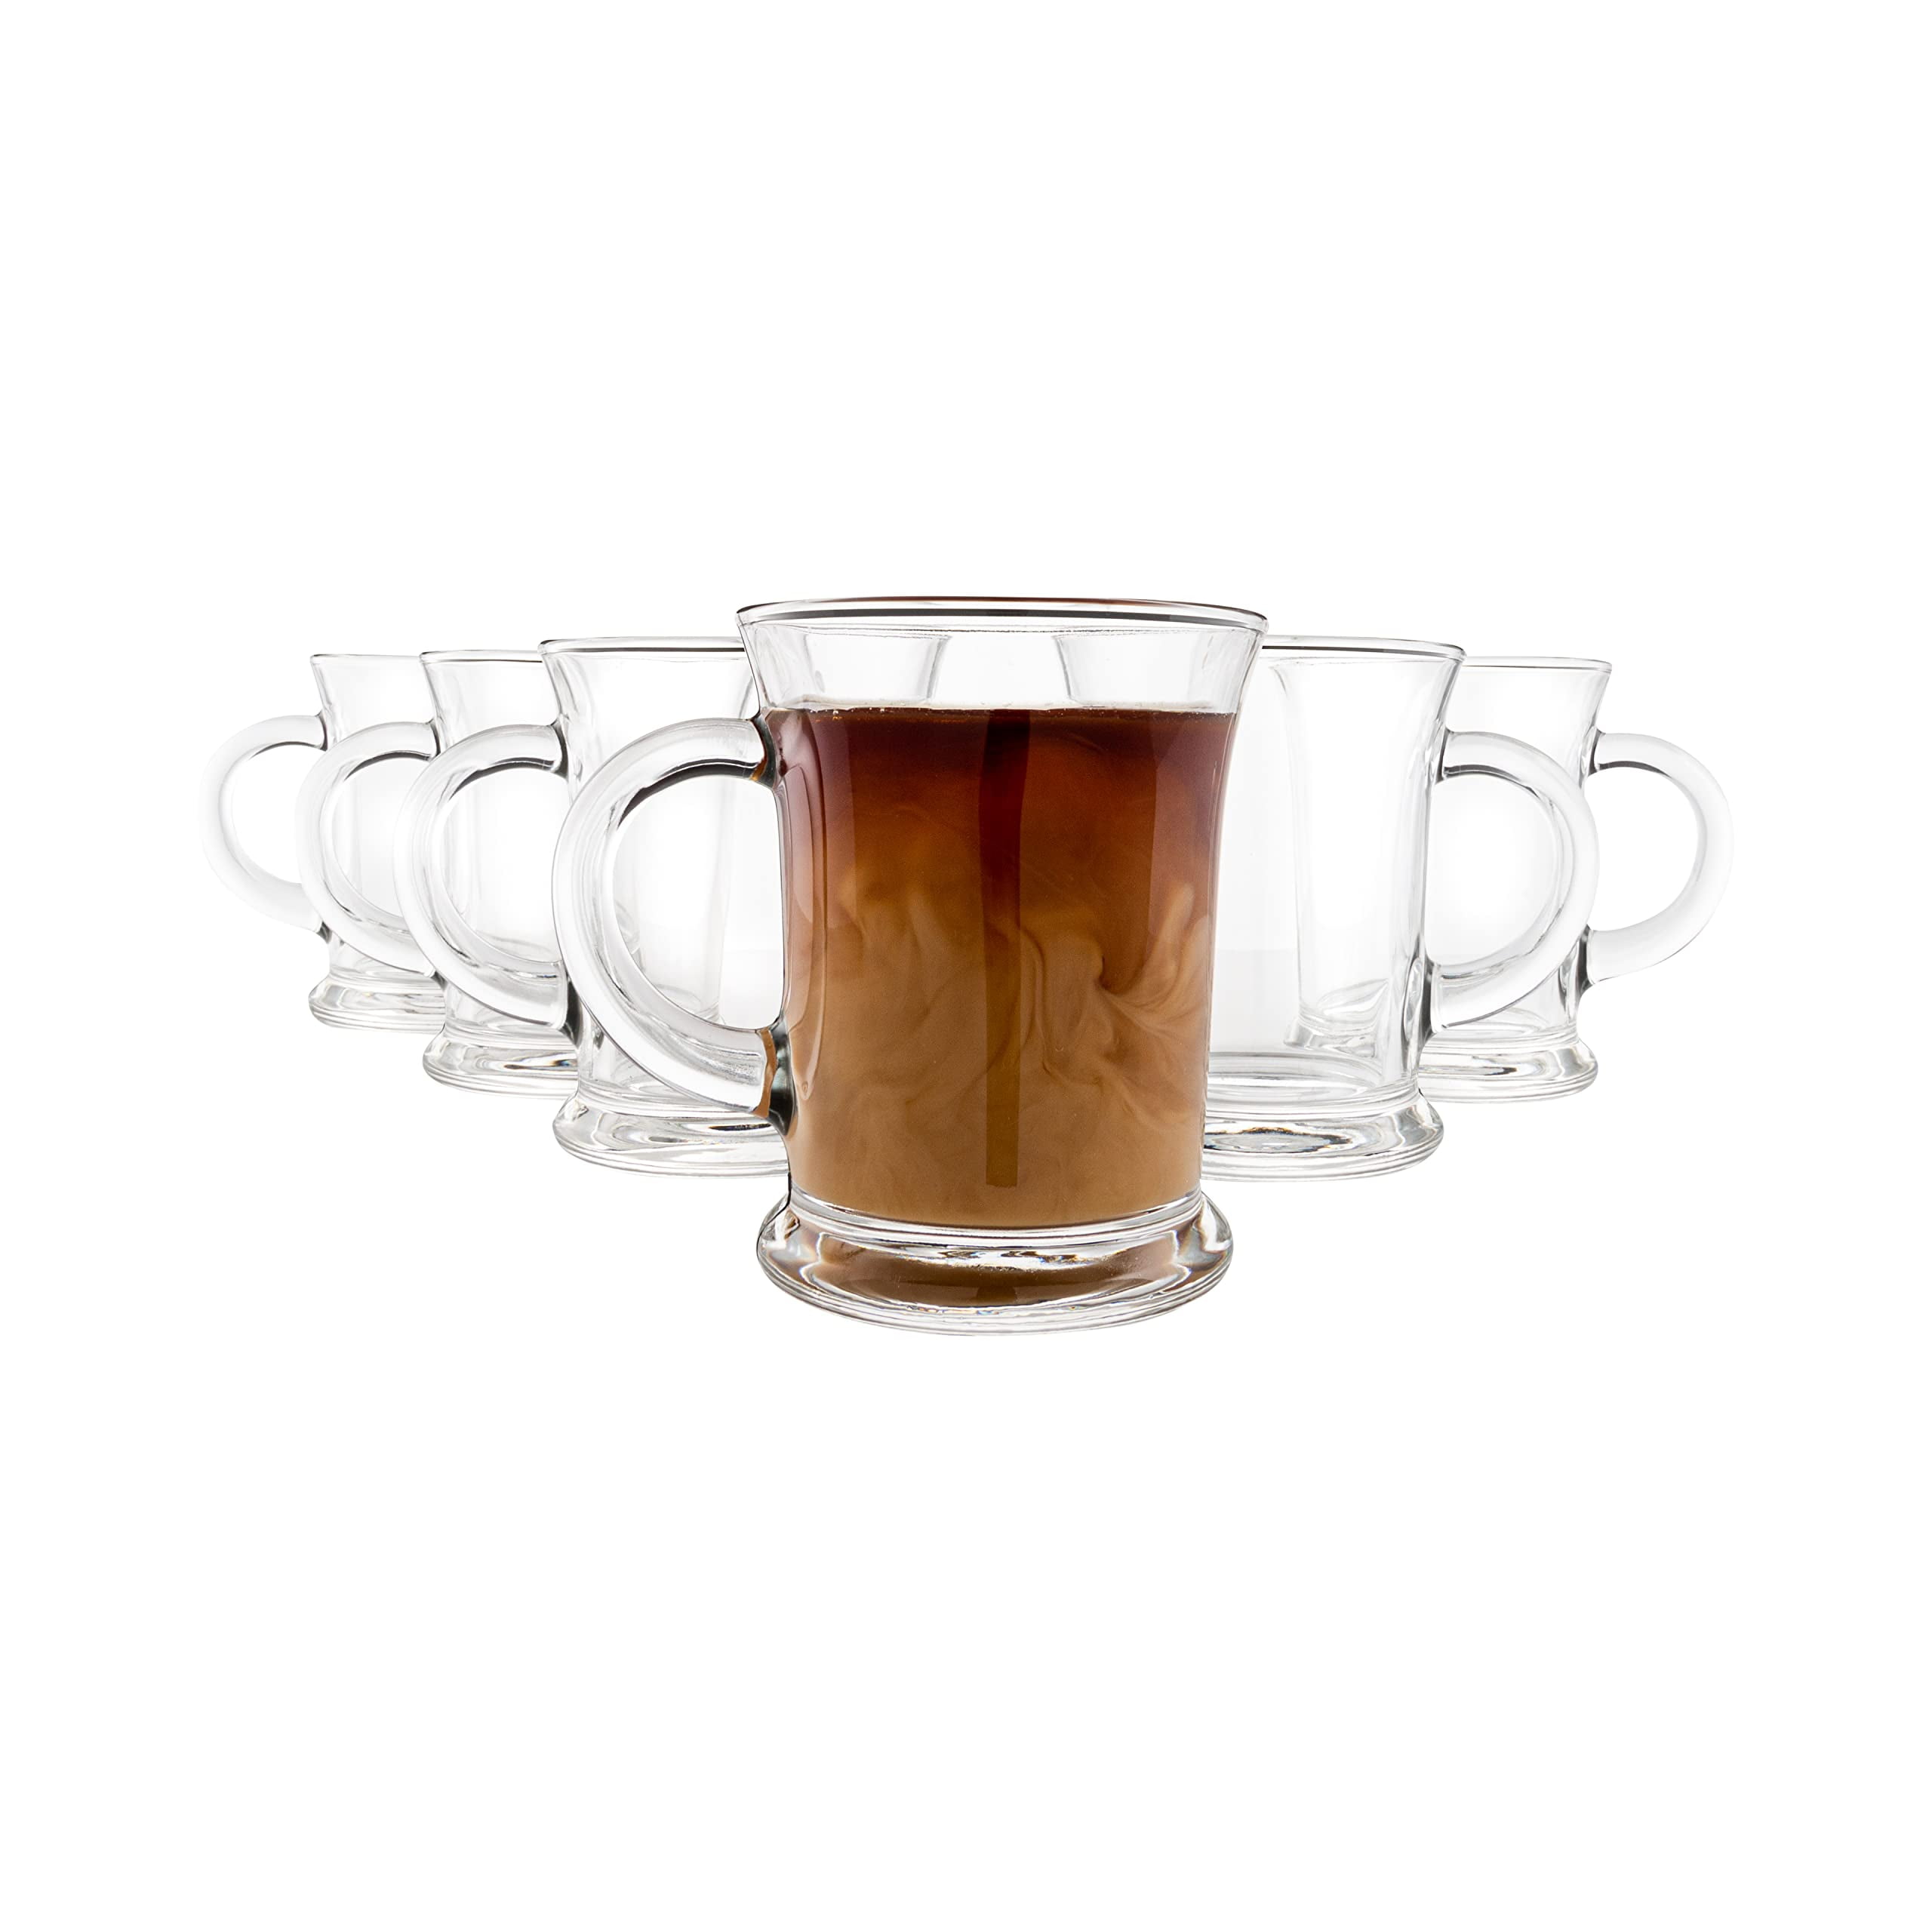 Vikko Espresso Cups with Saucer, 3.25 Ounce Small Coffee Cups, Set of 4  Clear Glass Coffee Mug